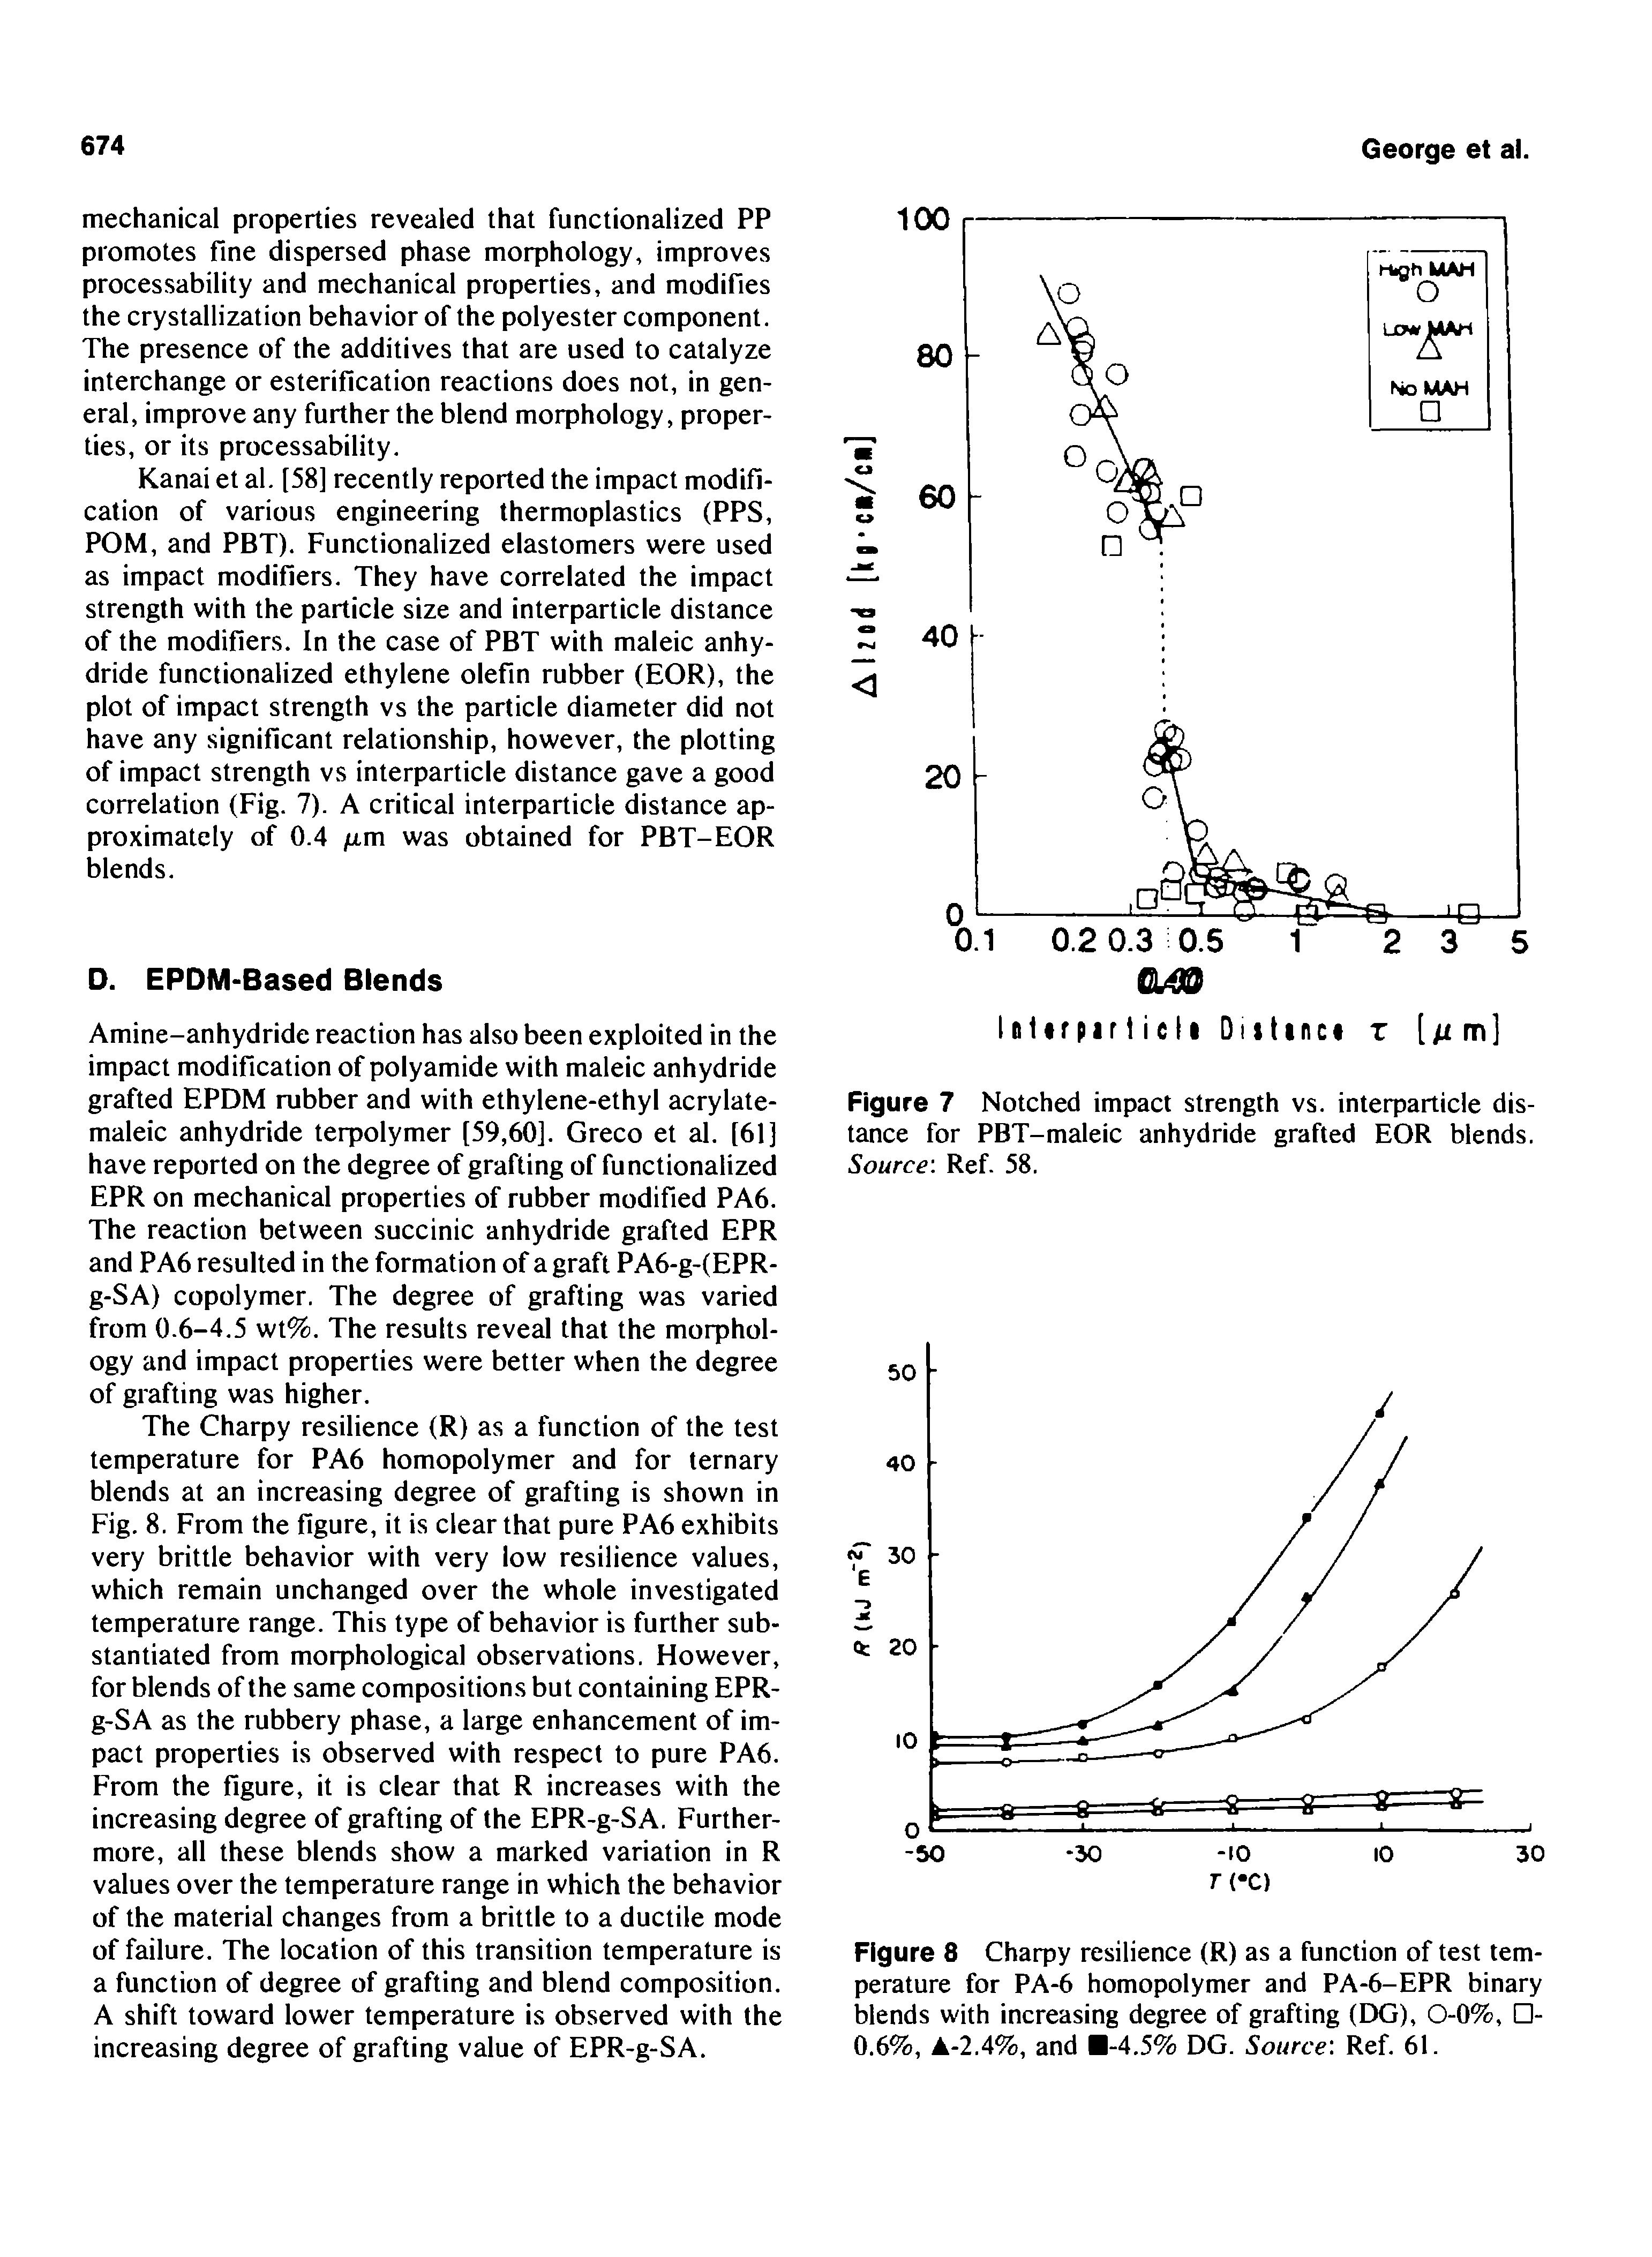 Figure 7 Notched impact strength vs. interparticle distance for PBT-maleic anhydride grafted EOR blends. Source Ref. 58.